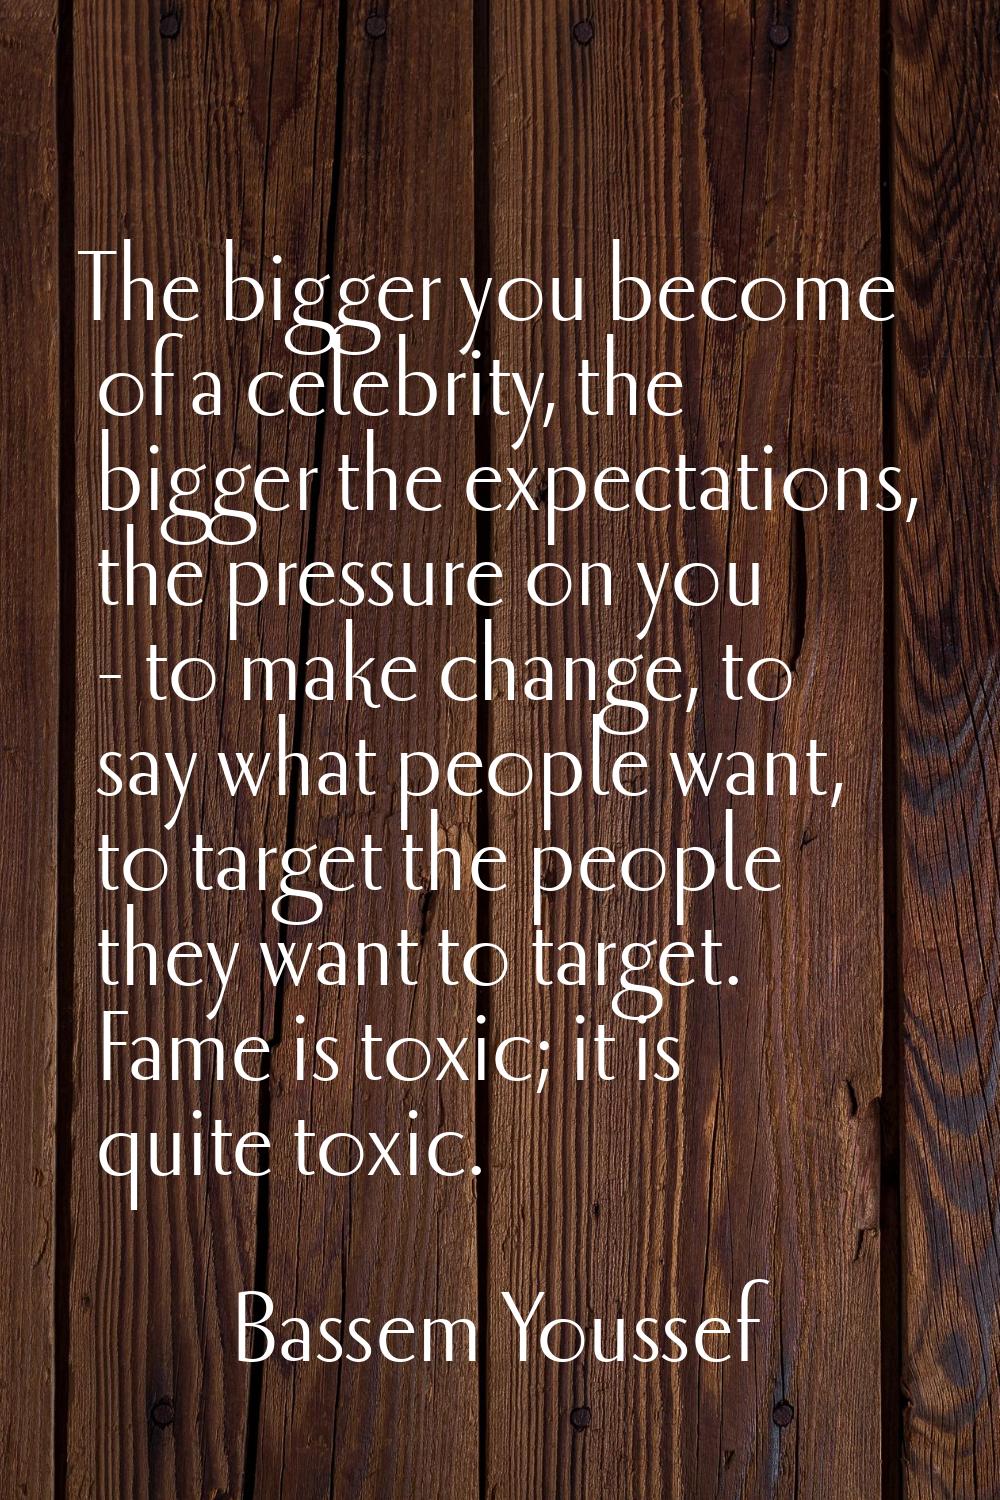 The bigger you become of a celebrity, the bigger the expectations, the pressure on you - to make ch